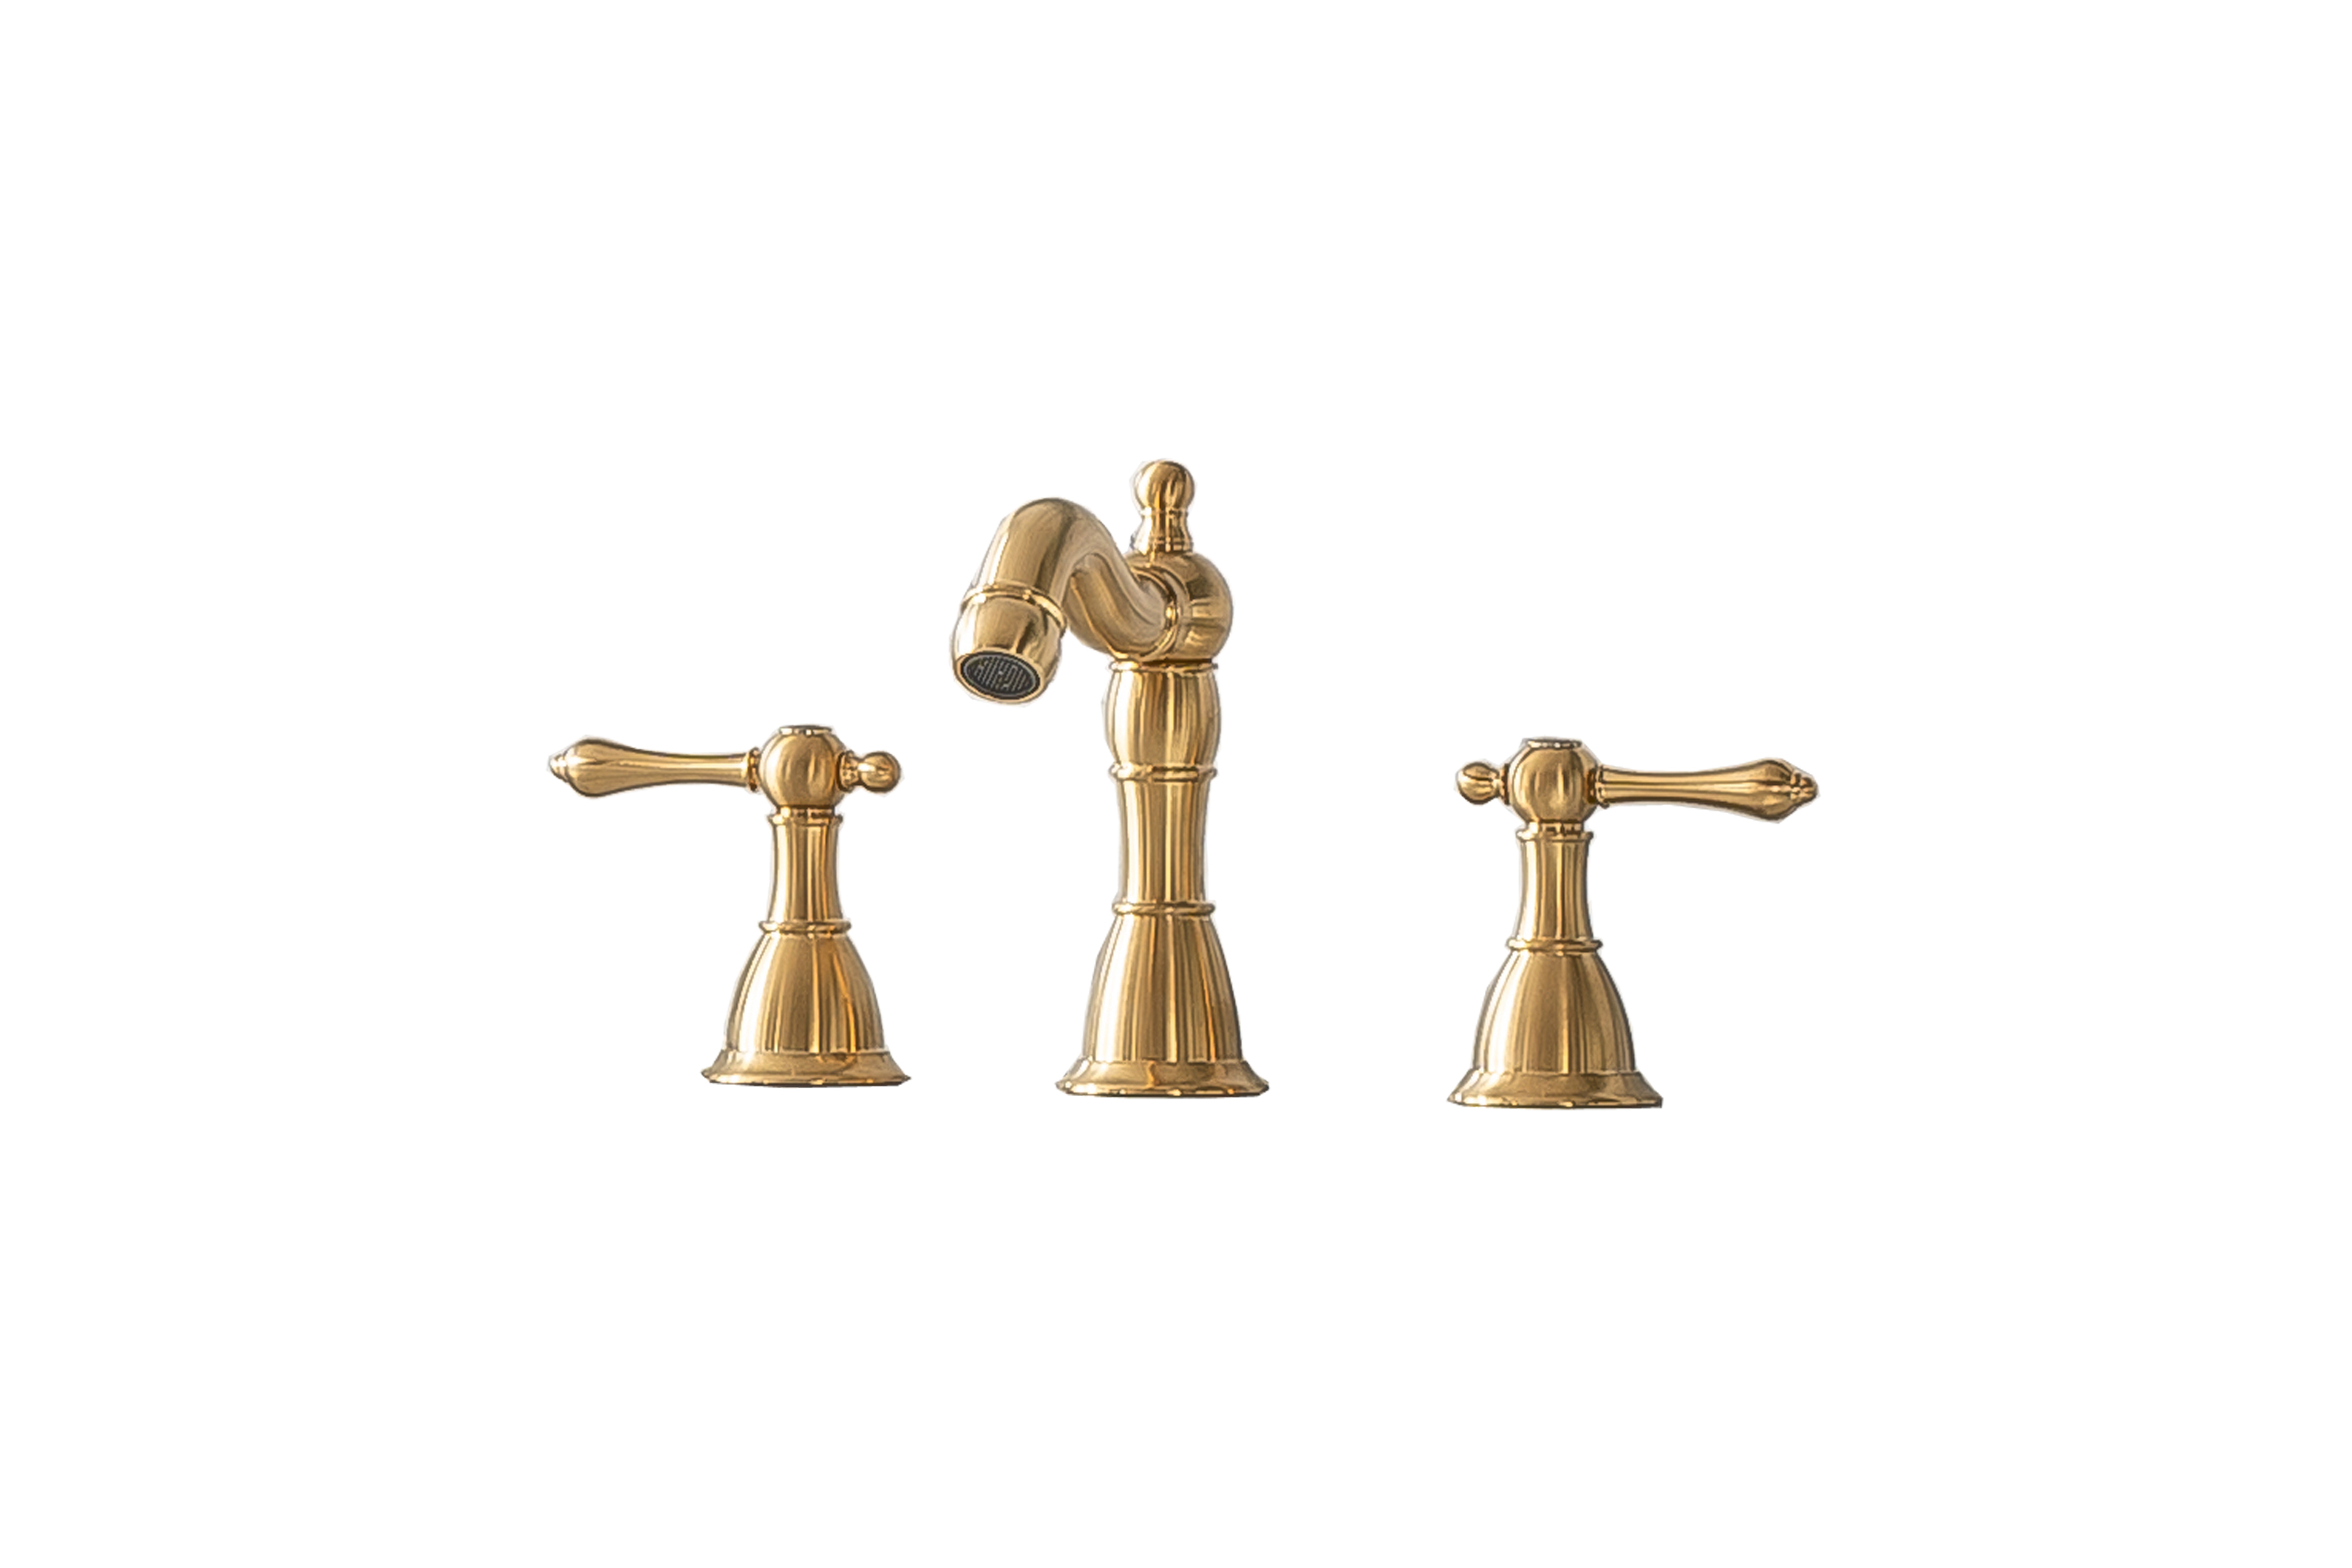 8" 3 Hole Widespread Faucet with 3 Finish Options